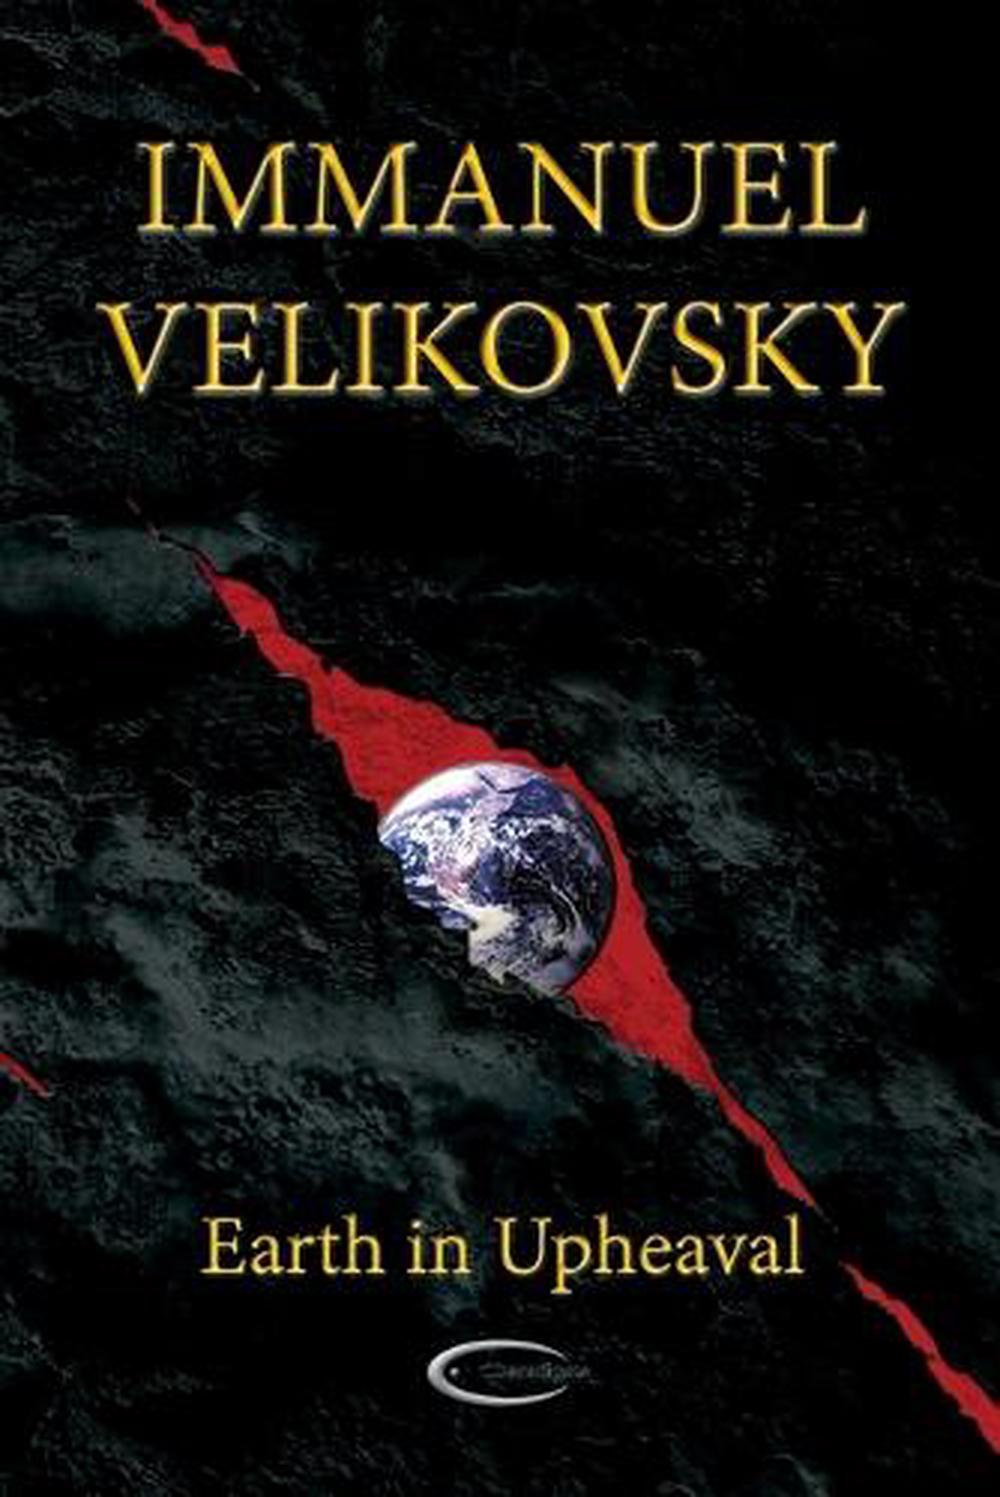 Earth in Upheaval by Immanuel Velikovsky (English) Paperback Book Free